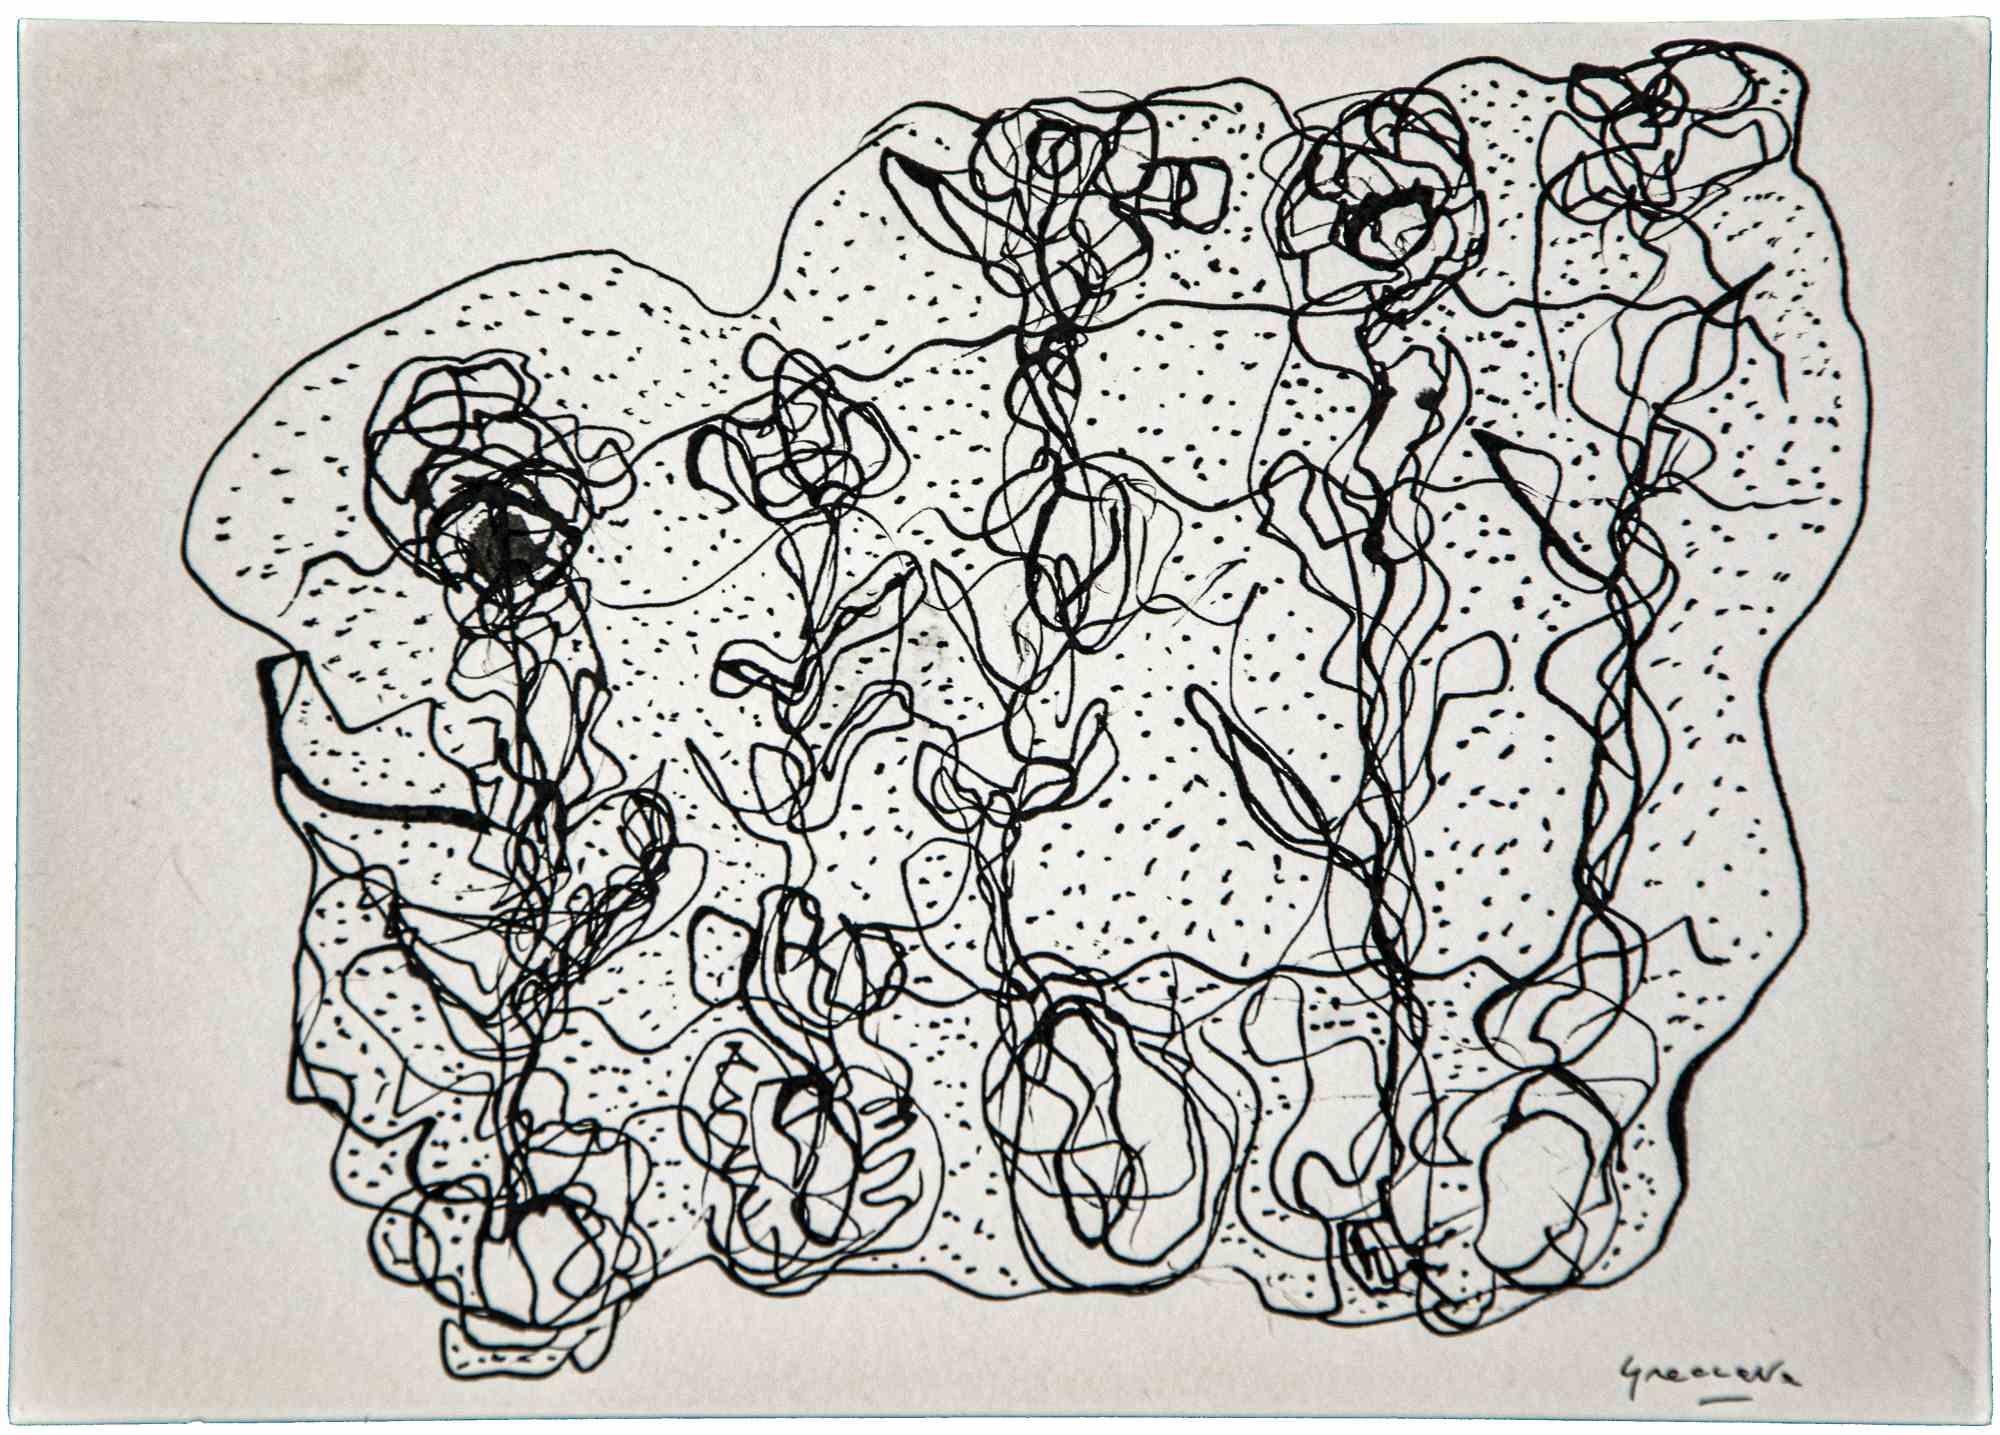 Composition is an original china ink drawing realized by Maurizio Gracceva (Roma, 1955) in 2010.

Good condition.

Hand-signed.

Author of numerous philosophical and literary essays, since a very young age  Maurizio Gracceva has loved painting, but